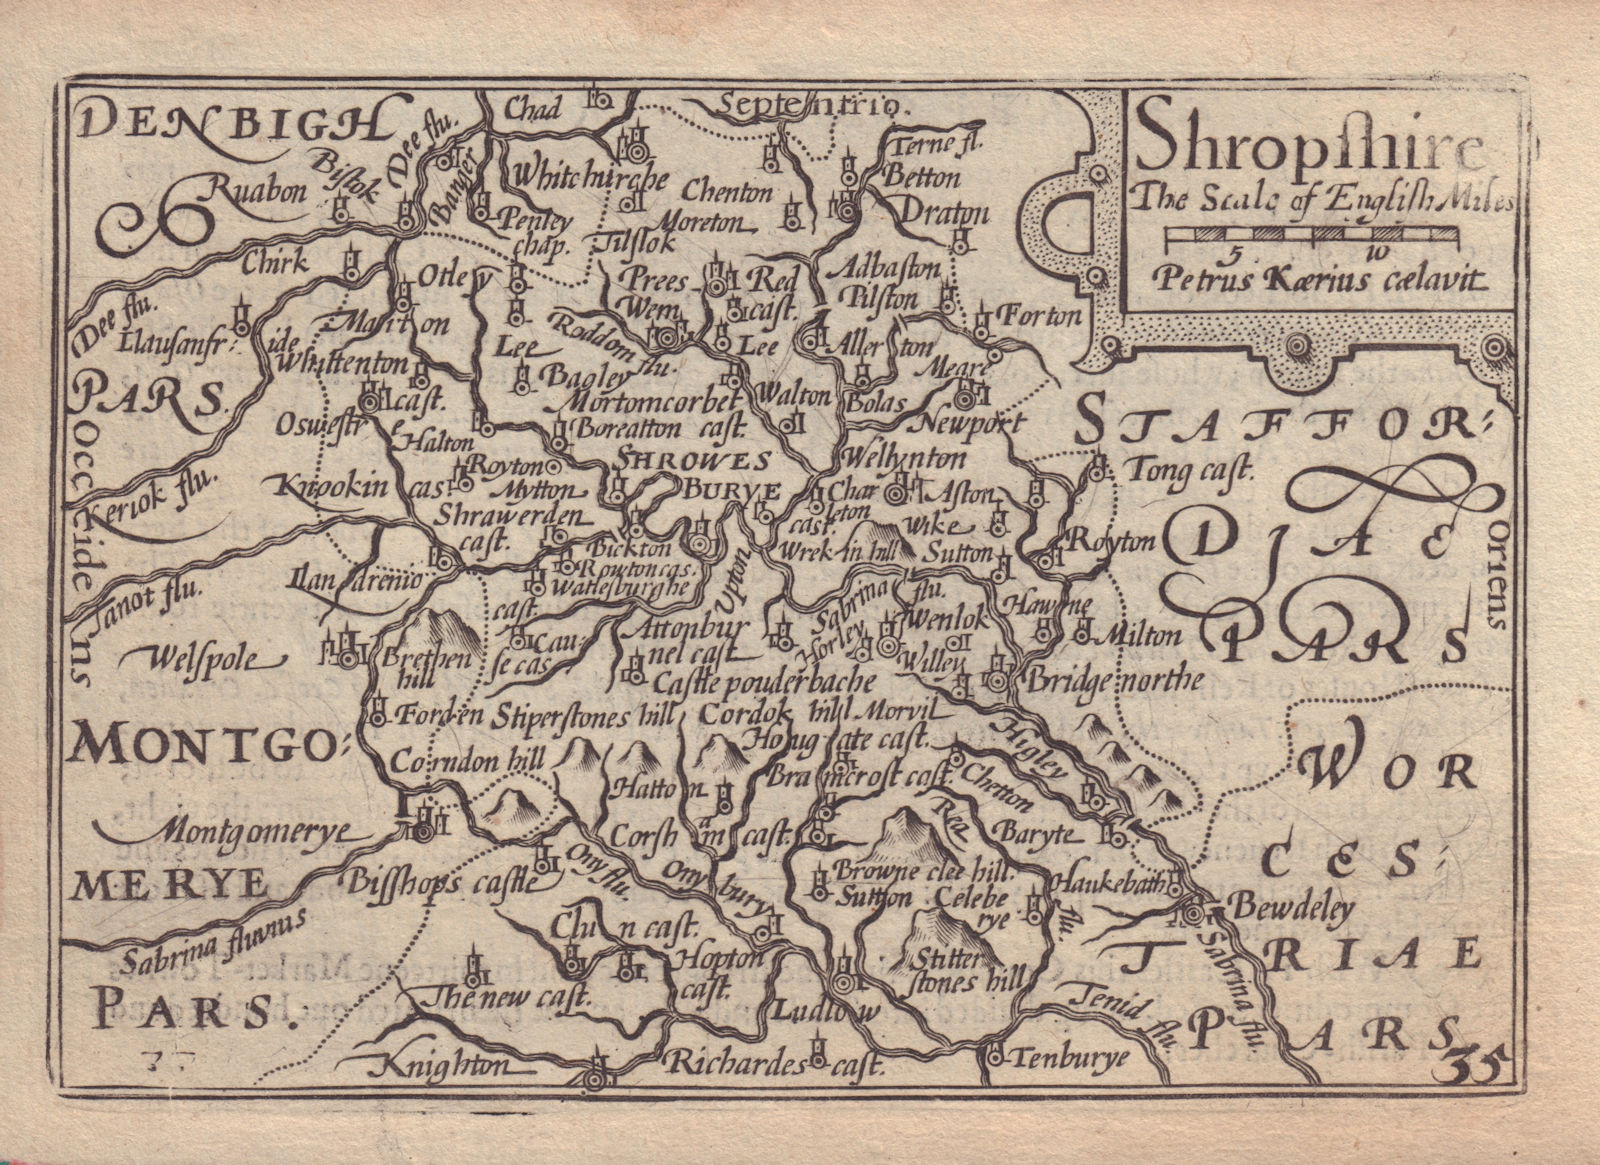 Shropshire by van den Keere. "Speed miniature" county map 1632 old antique